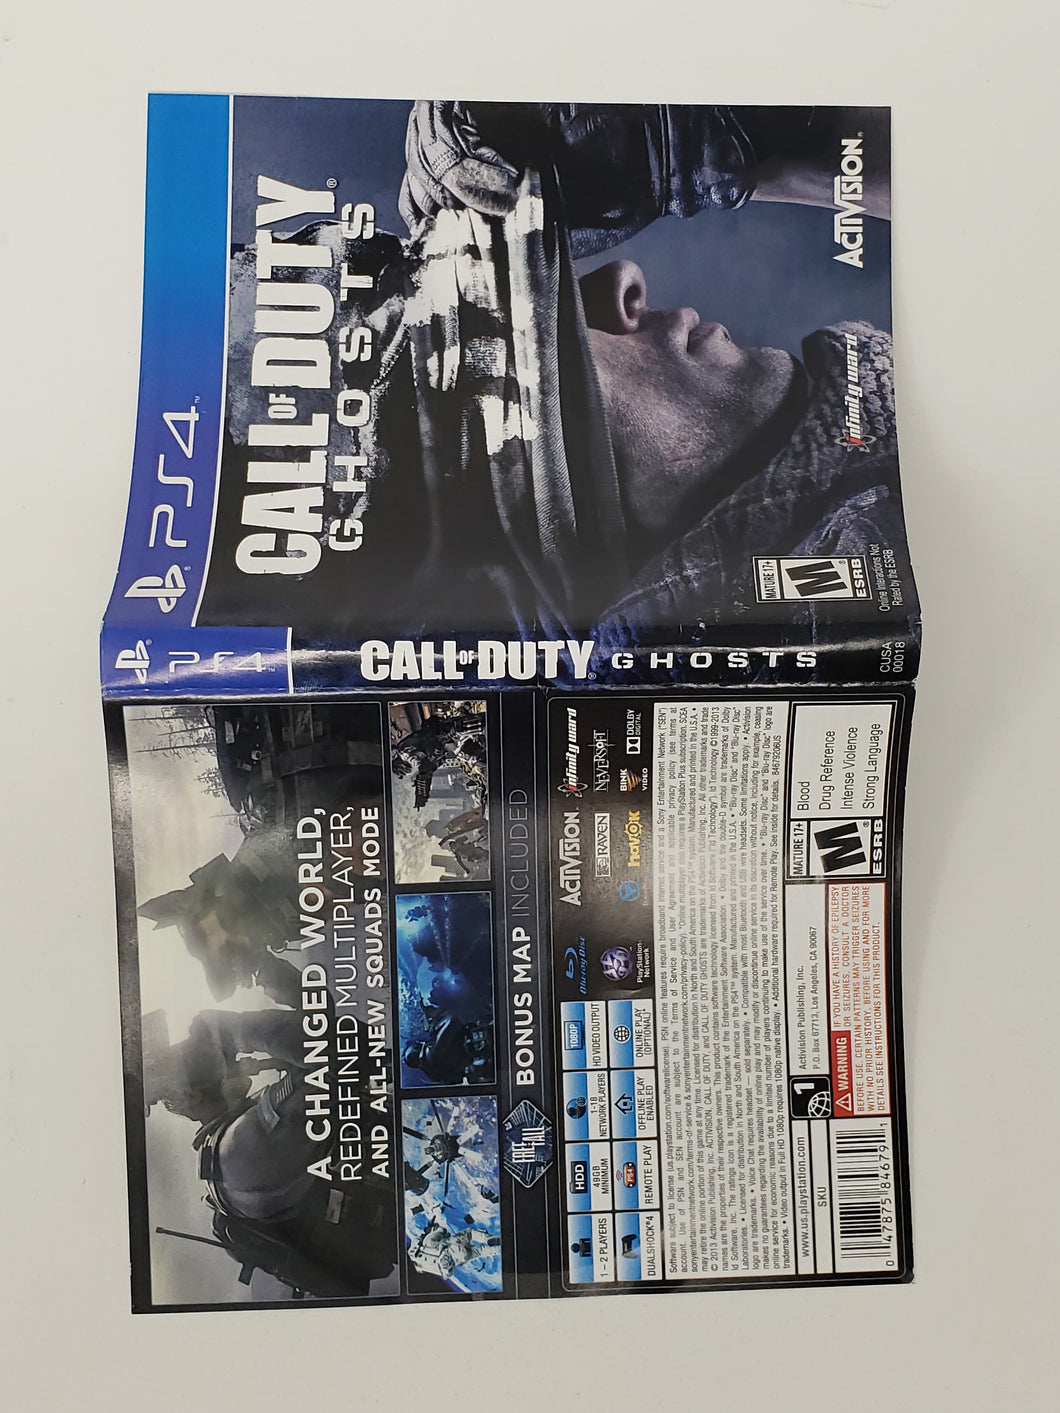 Call of Duty Ghosts [Couverture] - Sony Playstation 4 | PS4